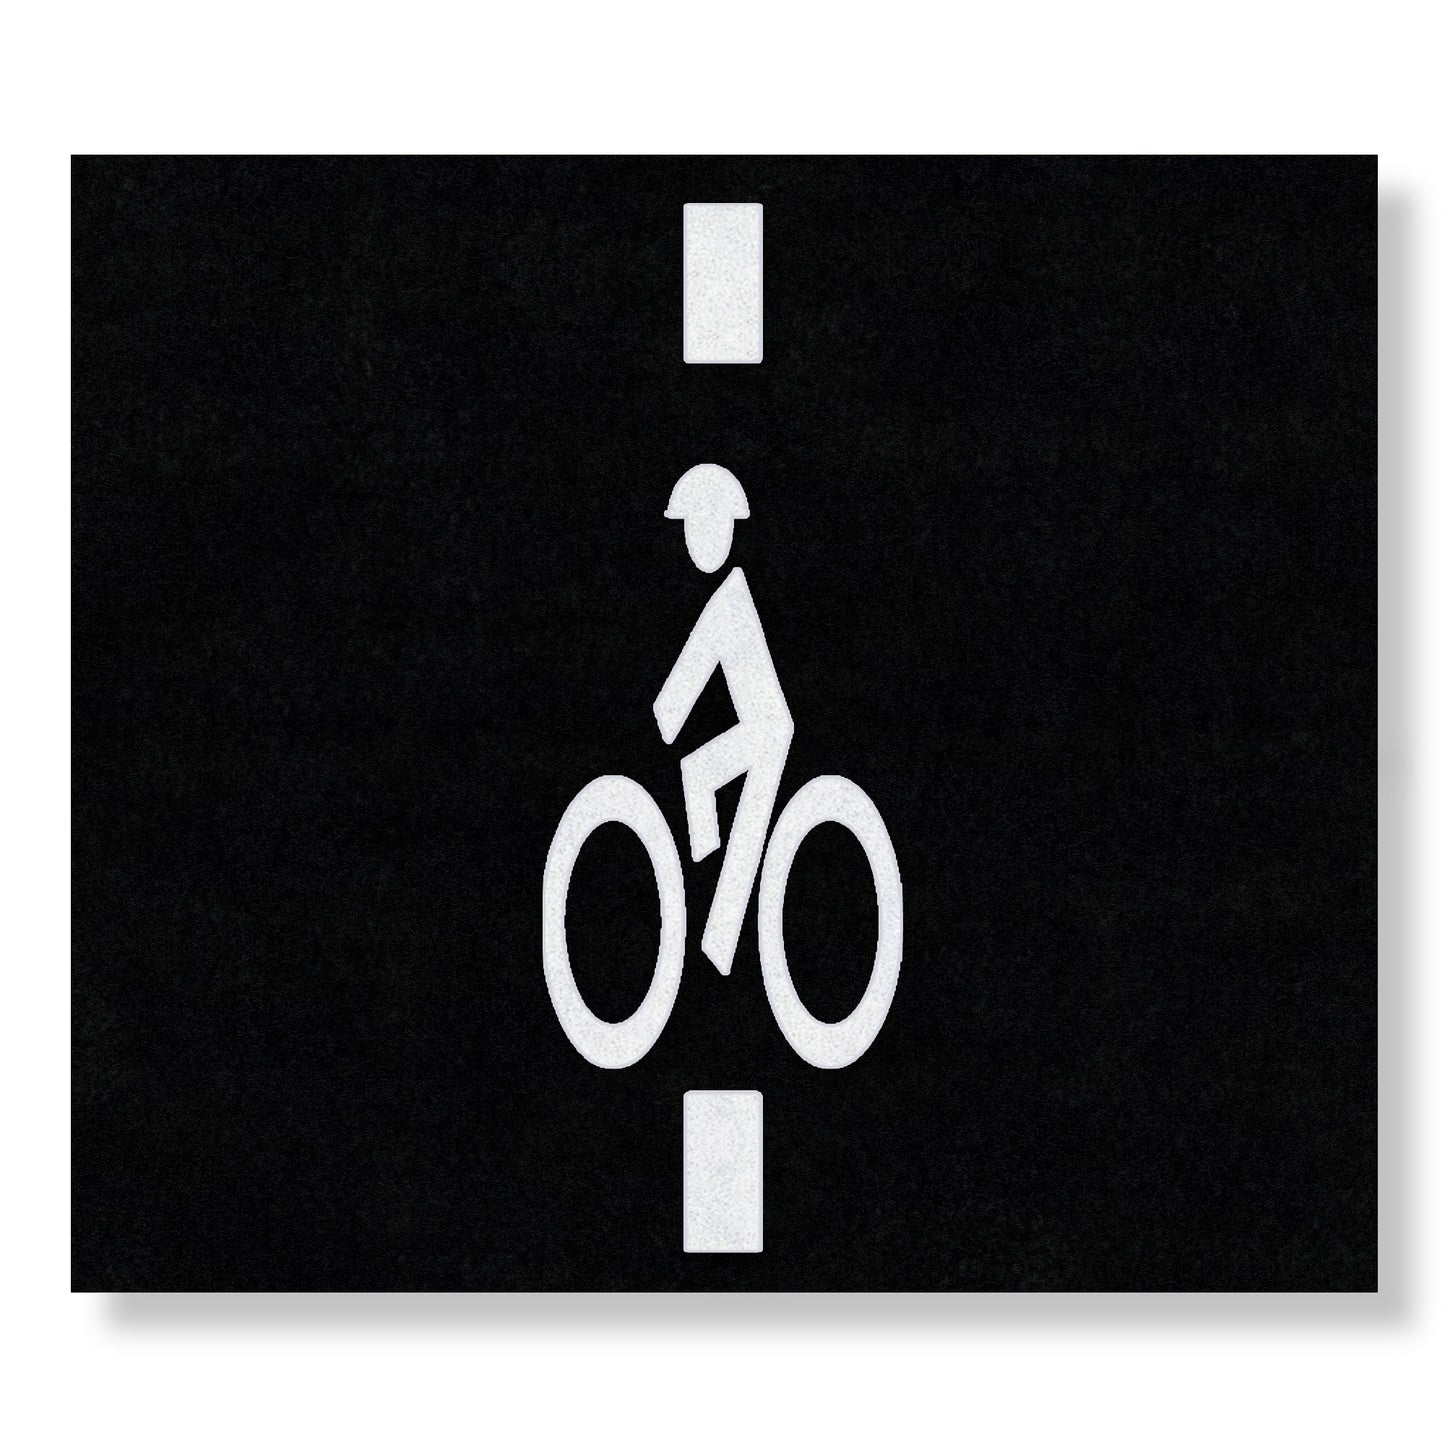 A white symbol of a person wearing a helmet riding a bike with a line extending above and below on a black rectangle.